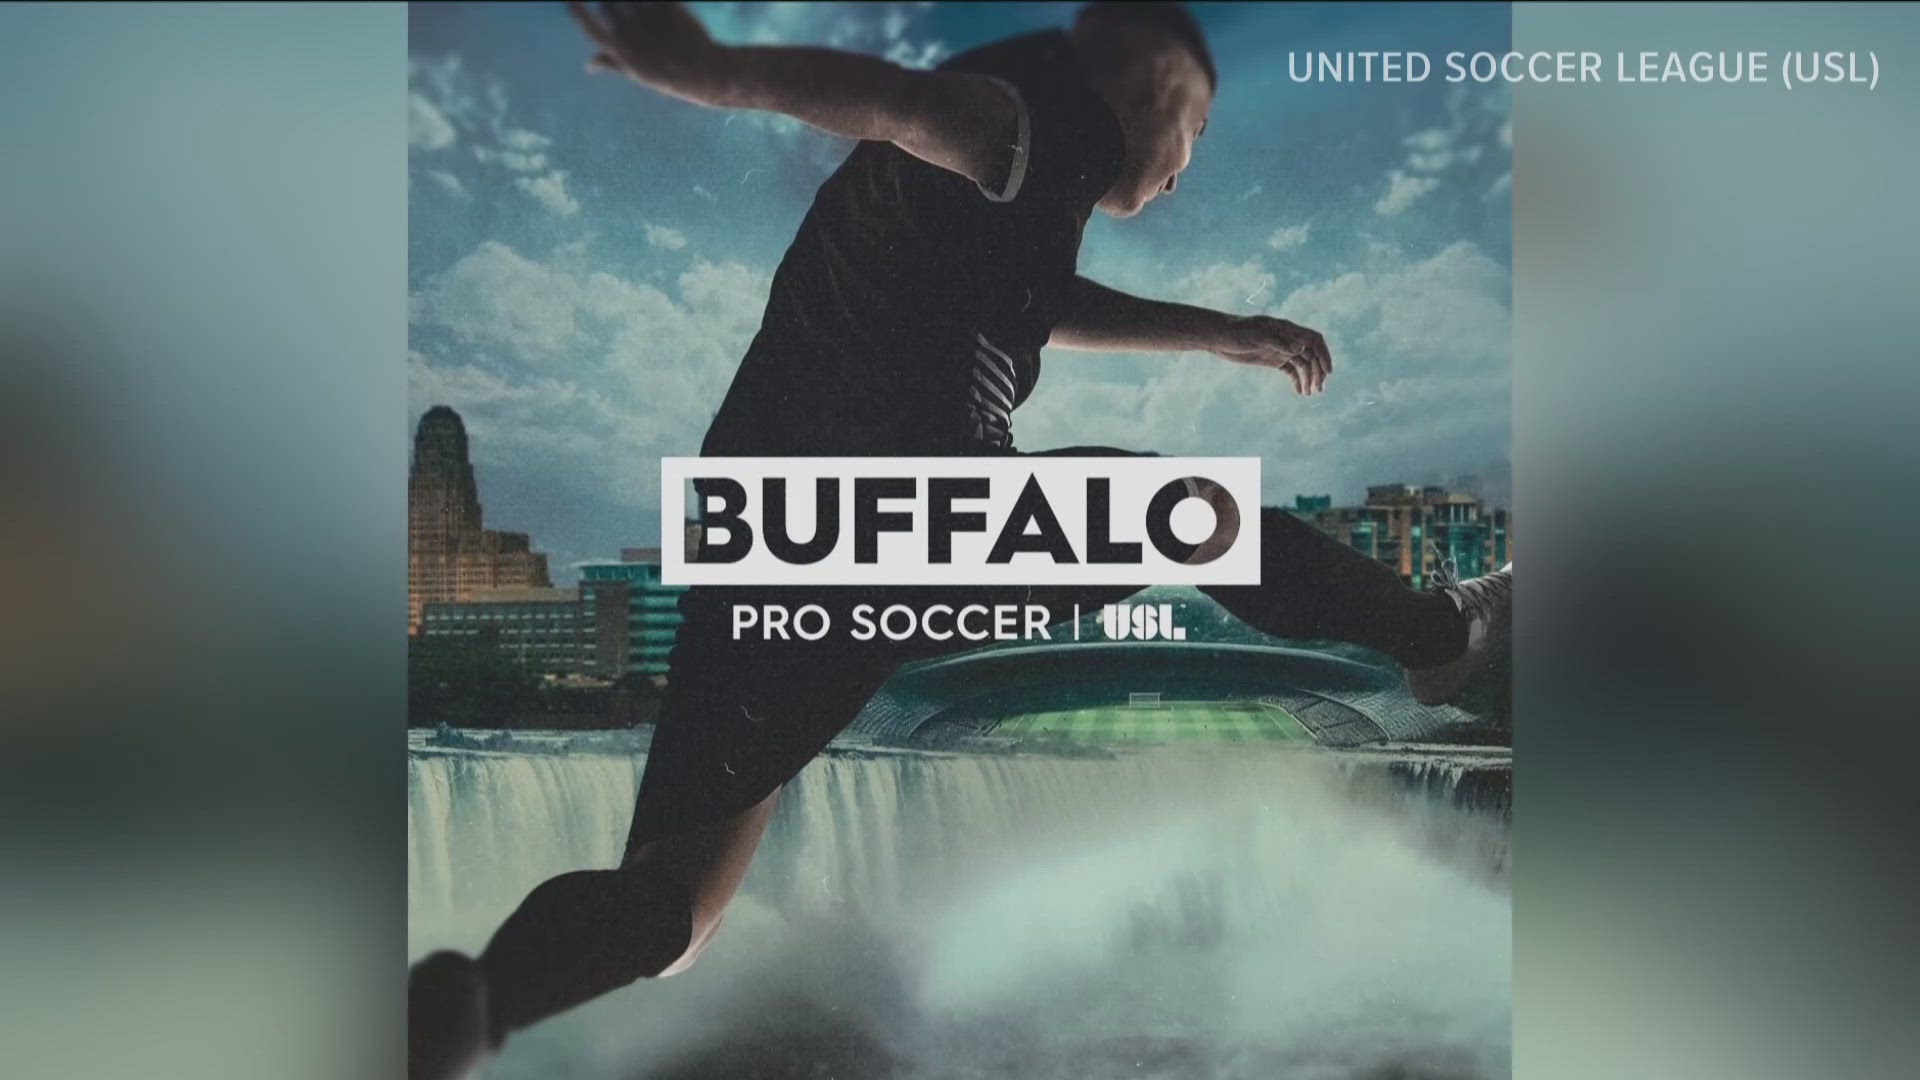 Plans to bring pro soccer here to Buffalo